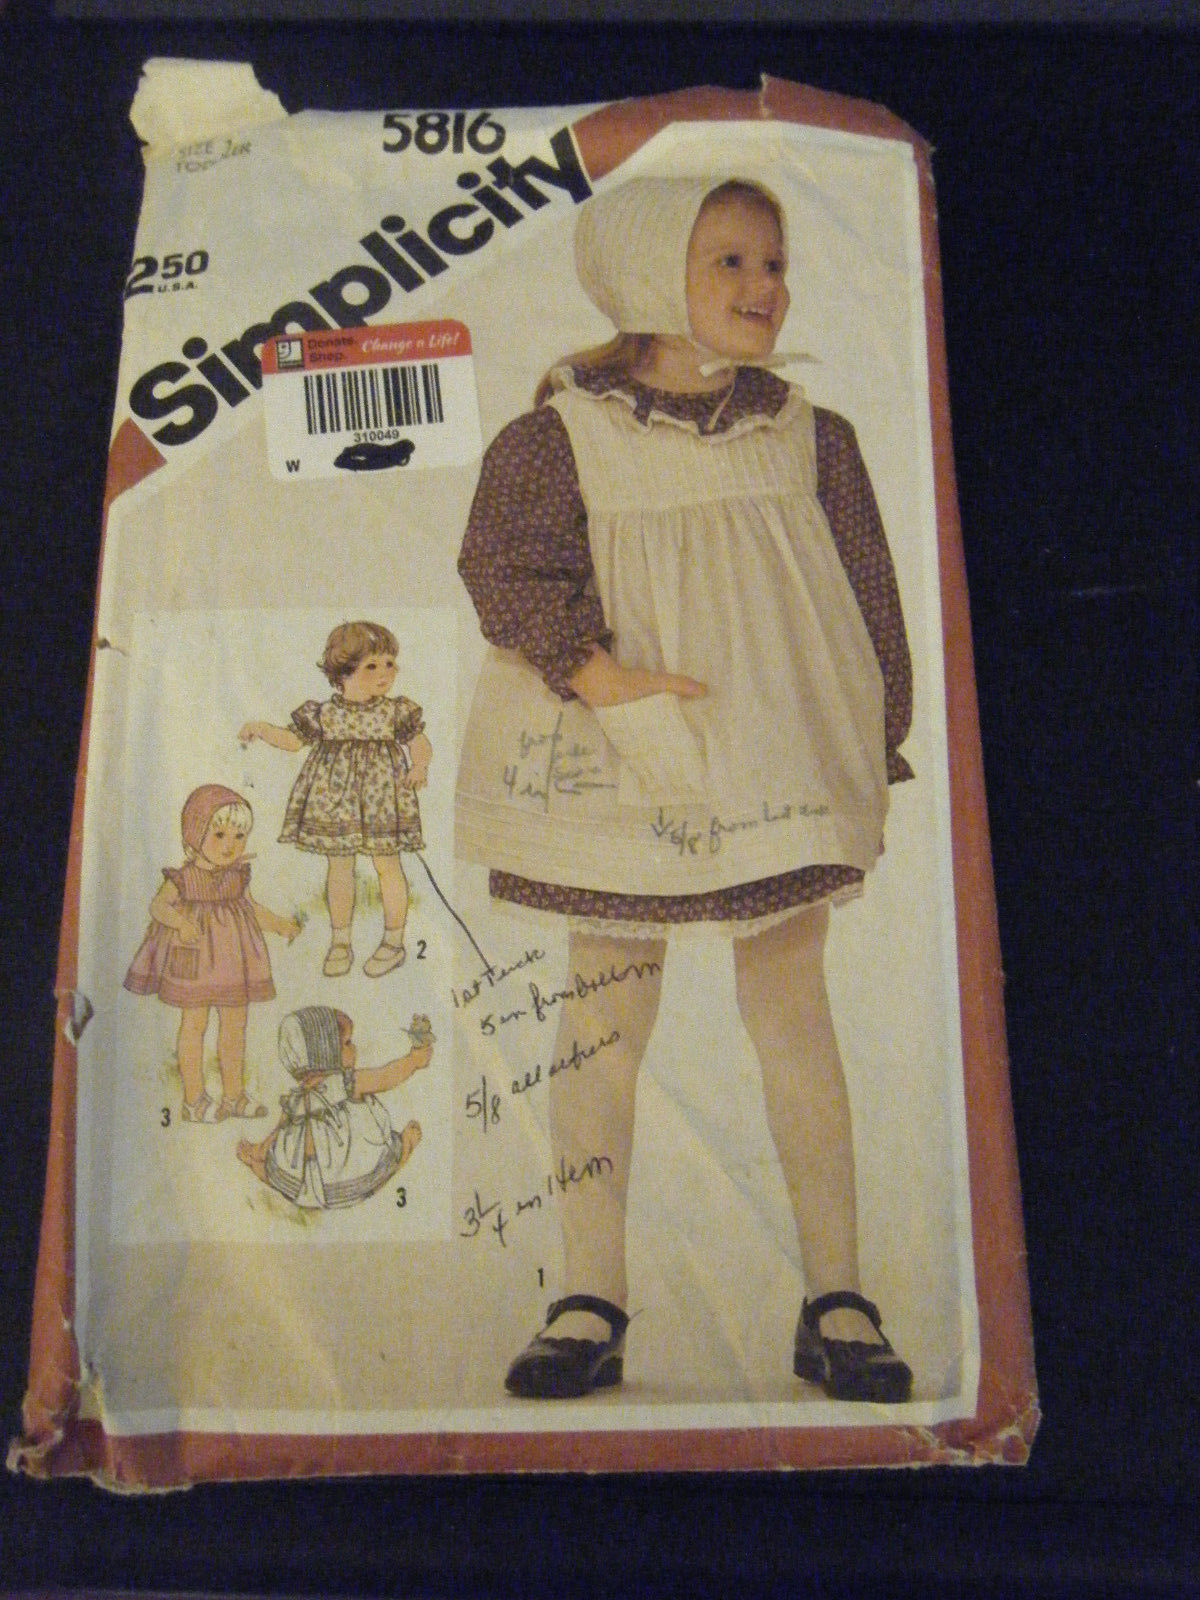 Primary image for Simplicity 5816 Toddler Girl's Dress, Pinafore, Sundress & Hat Pattern - Size 1T